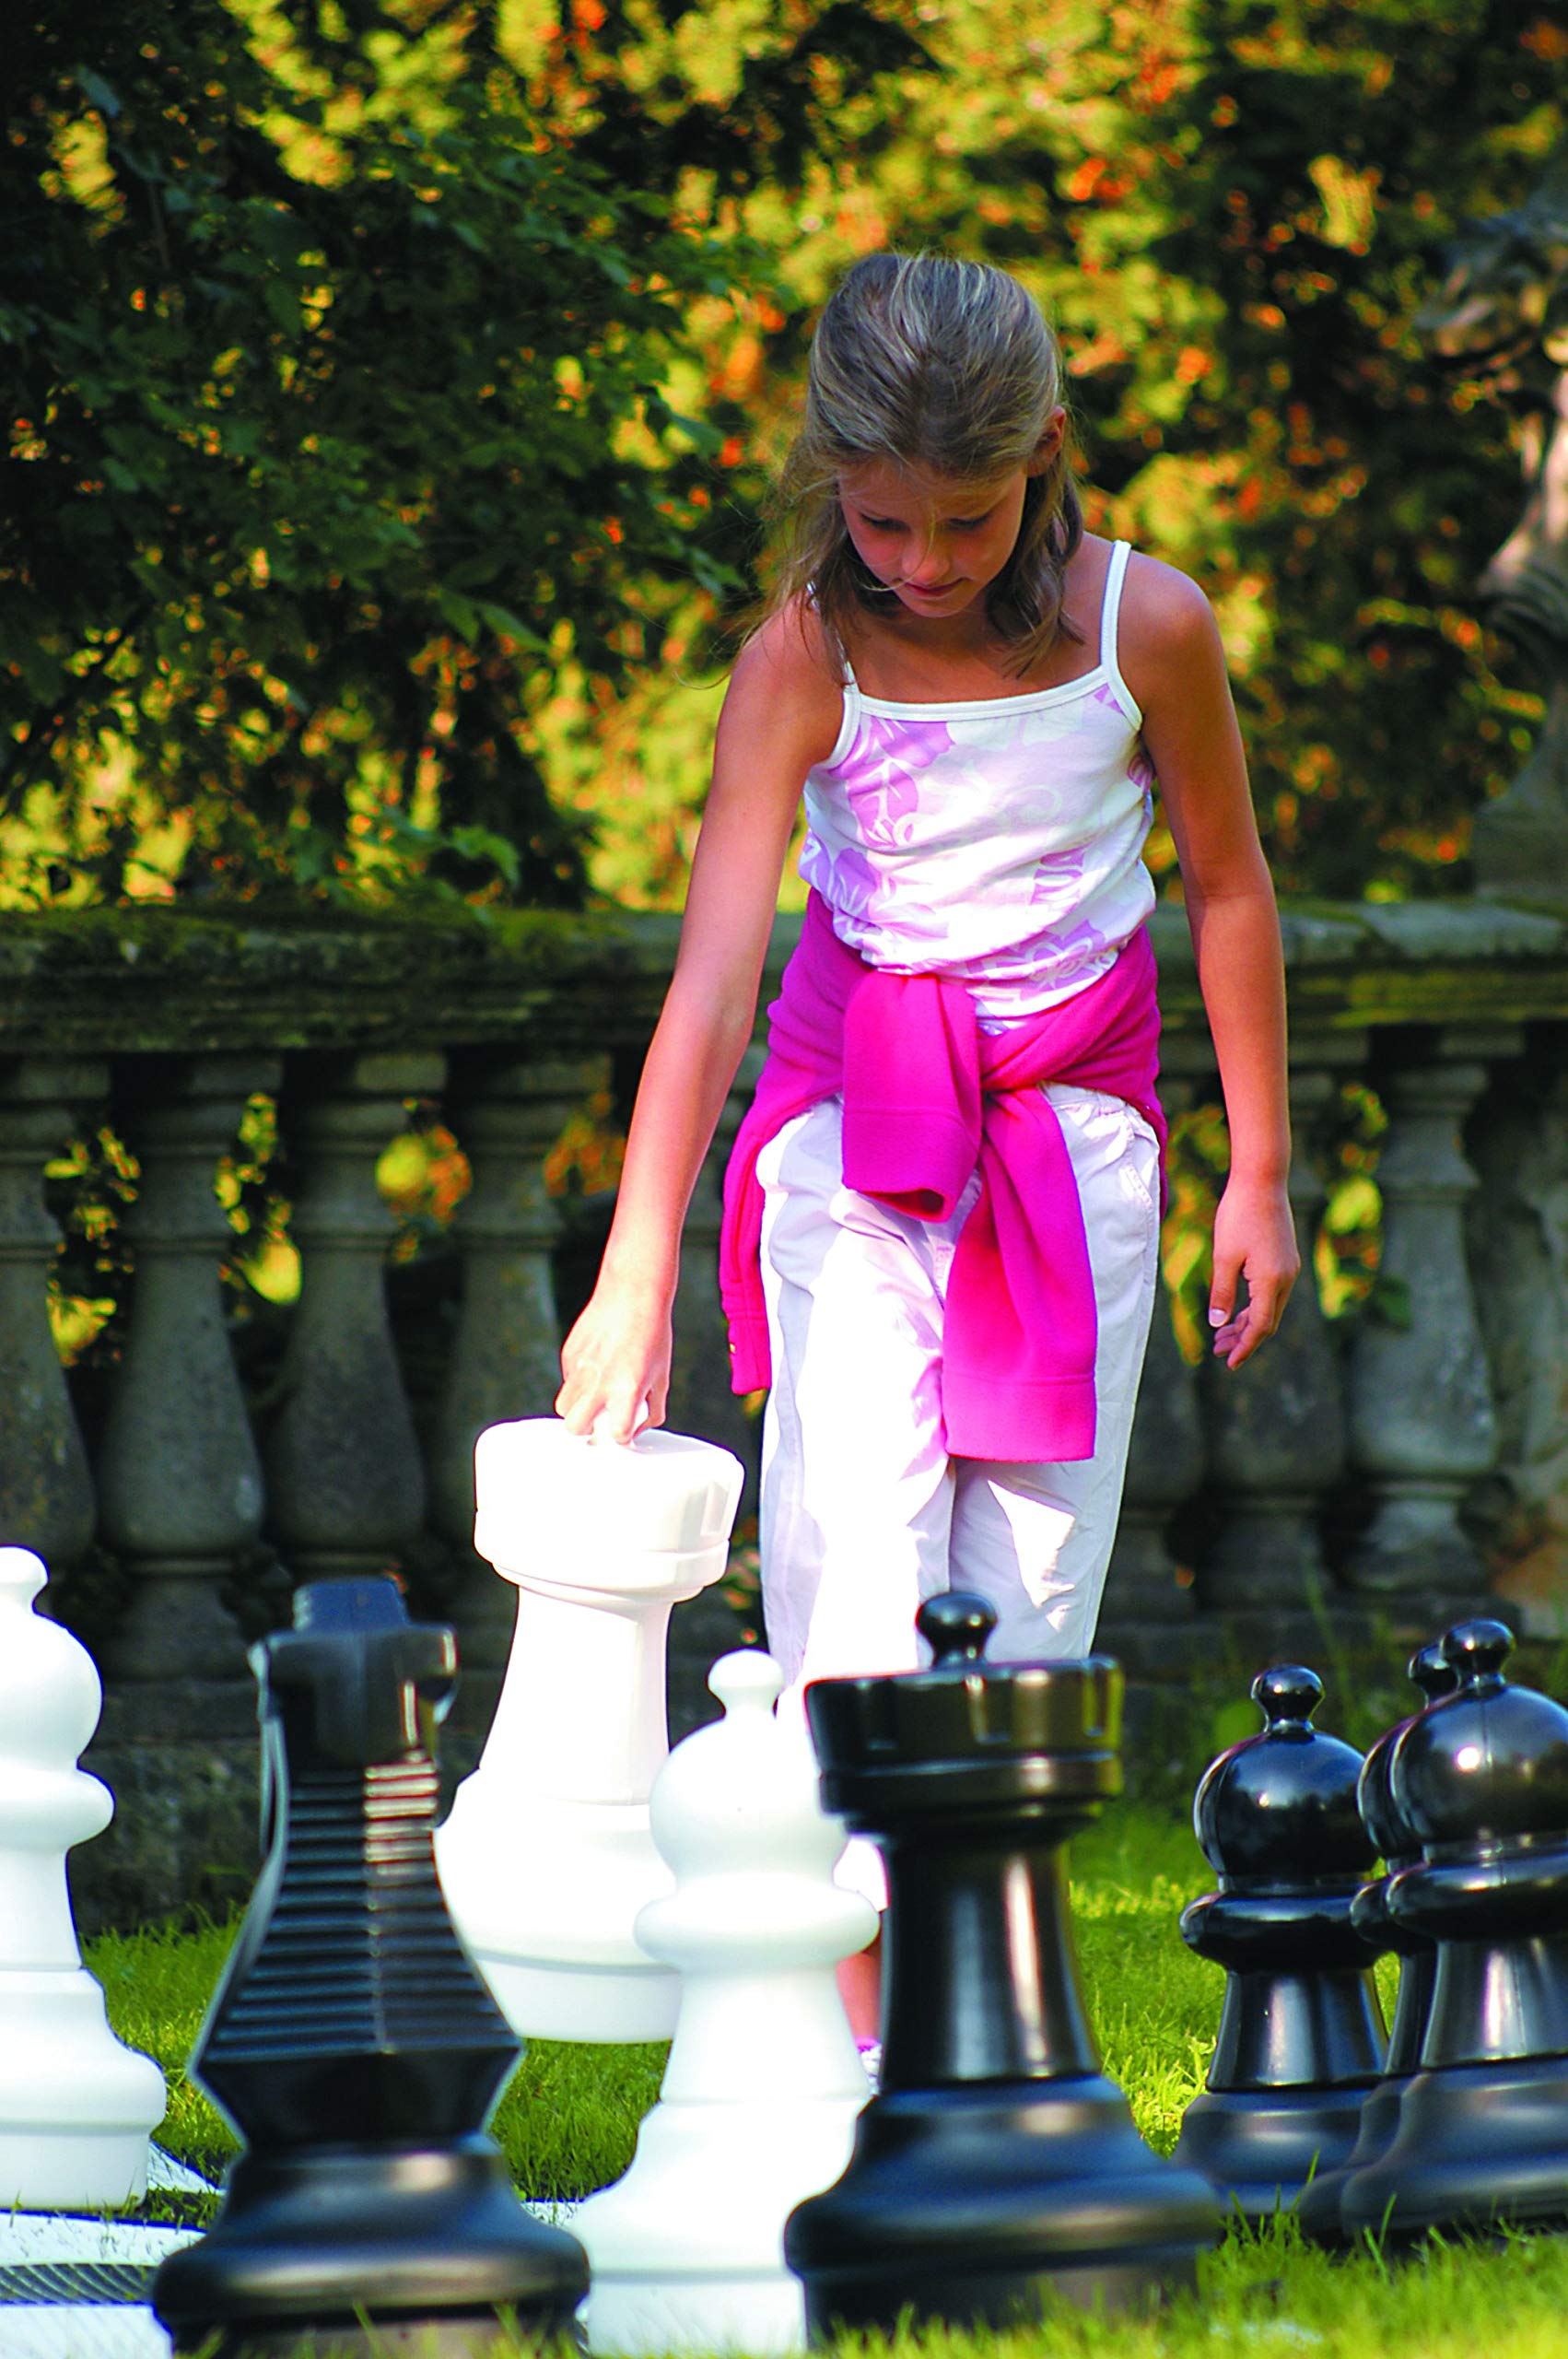 Kettler Giant Chess Pieces Complete Set with 25 Inches Tall King - White and Black